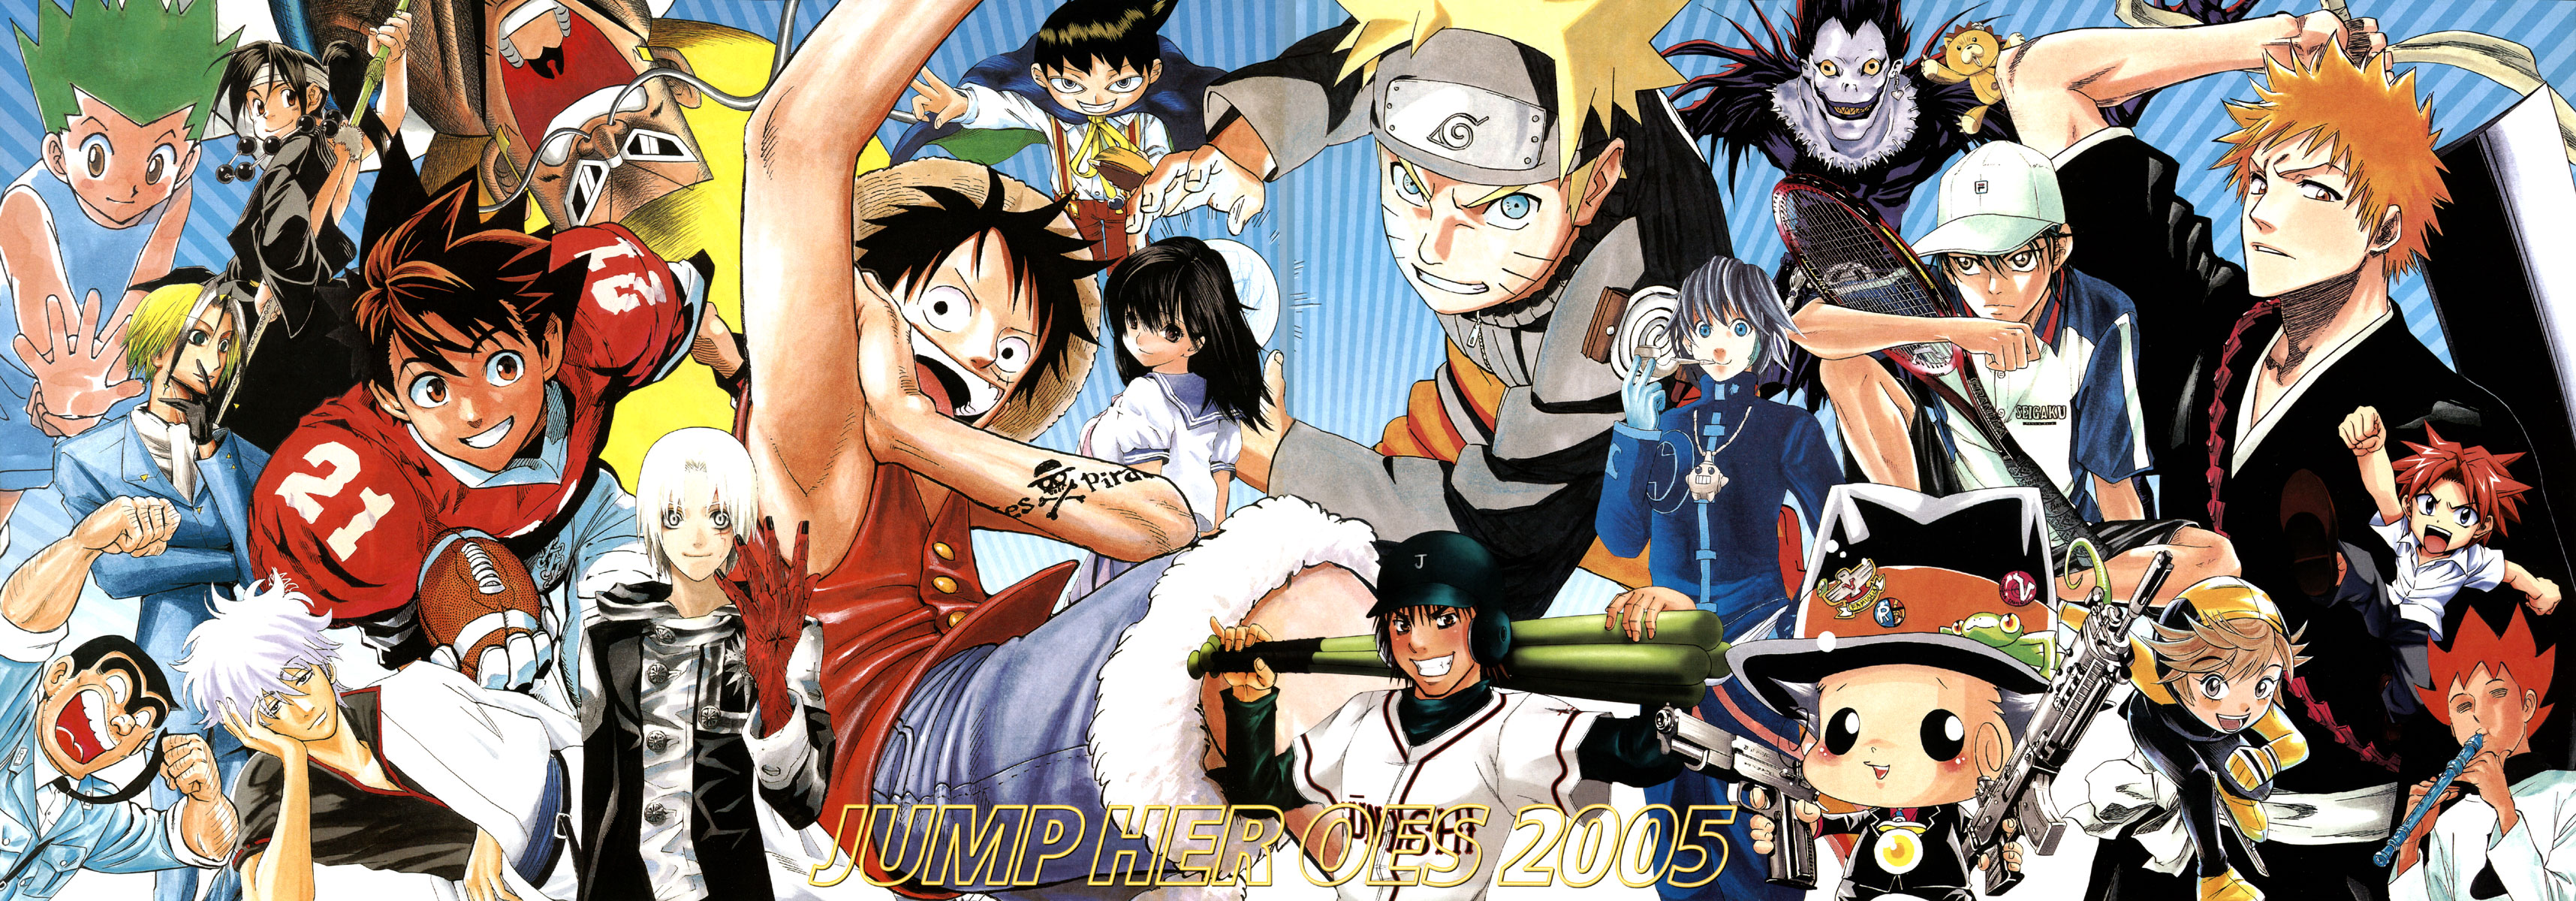 Weekly Shonen Jump Anime  by chad28  AnimePlanet